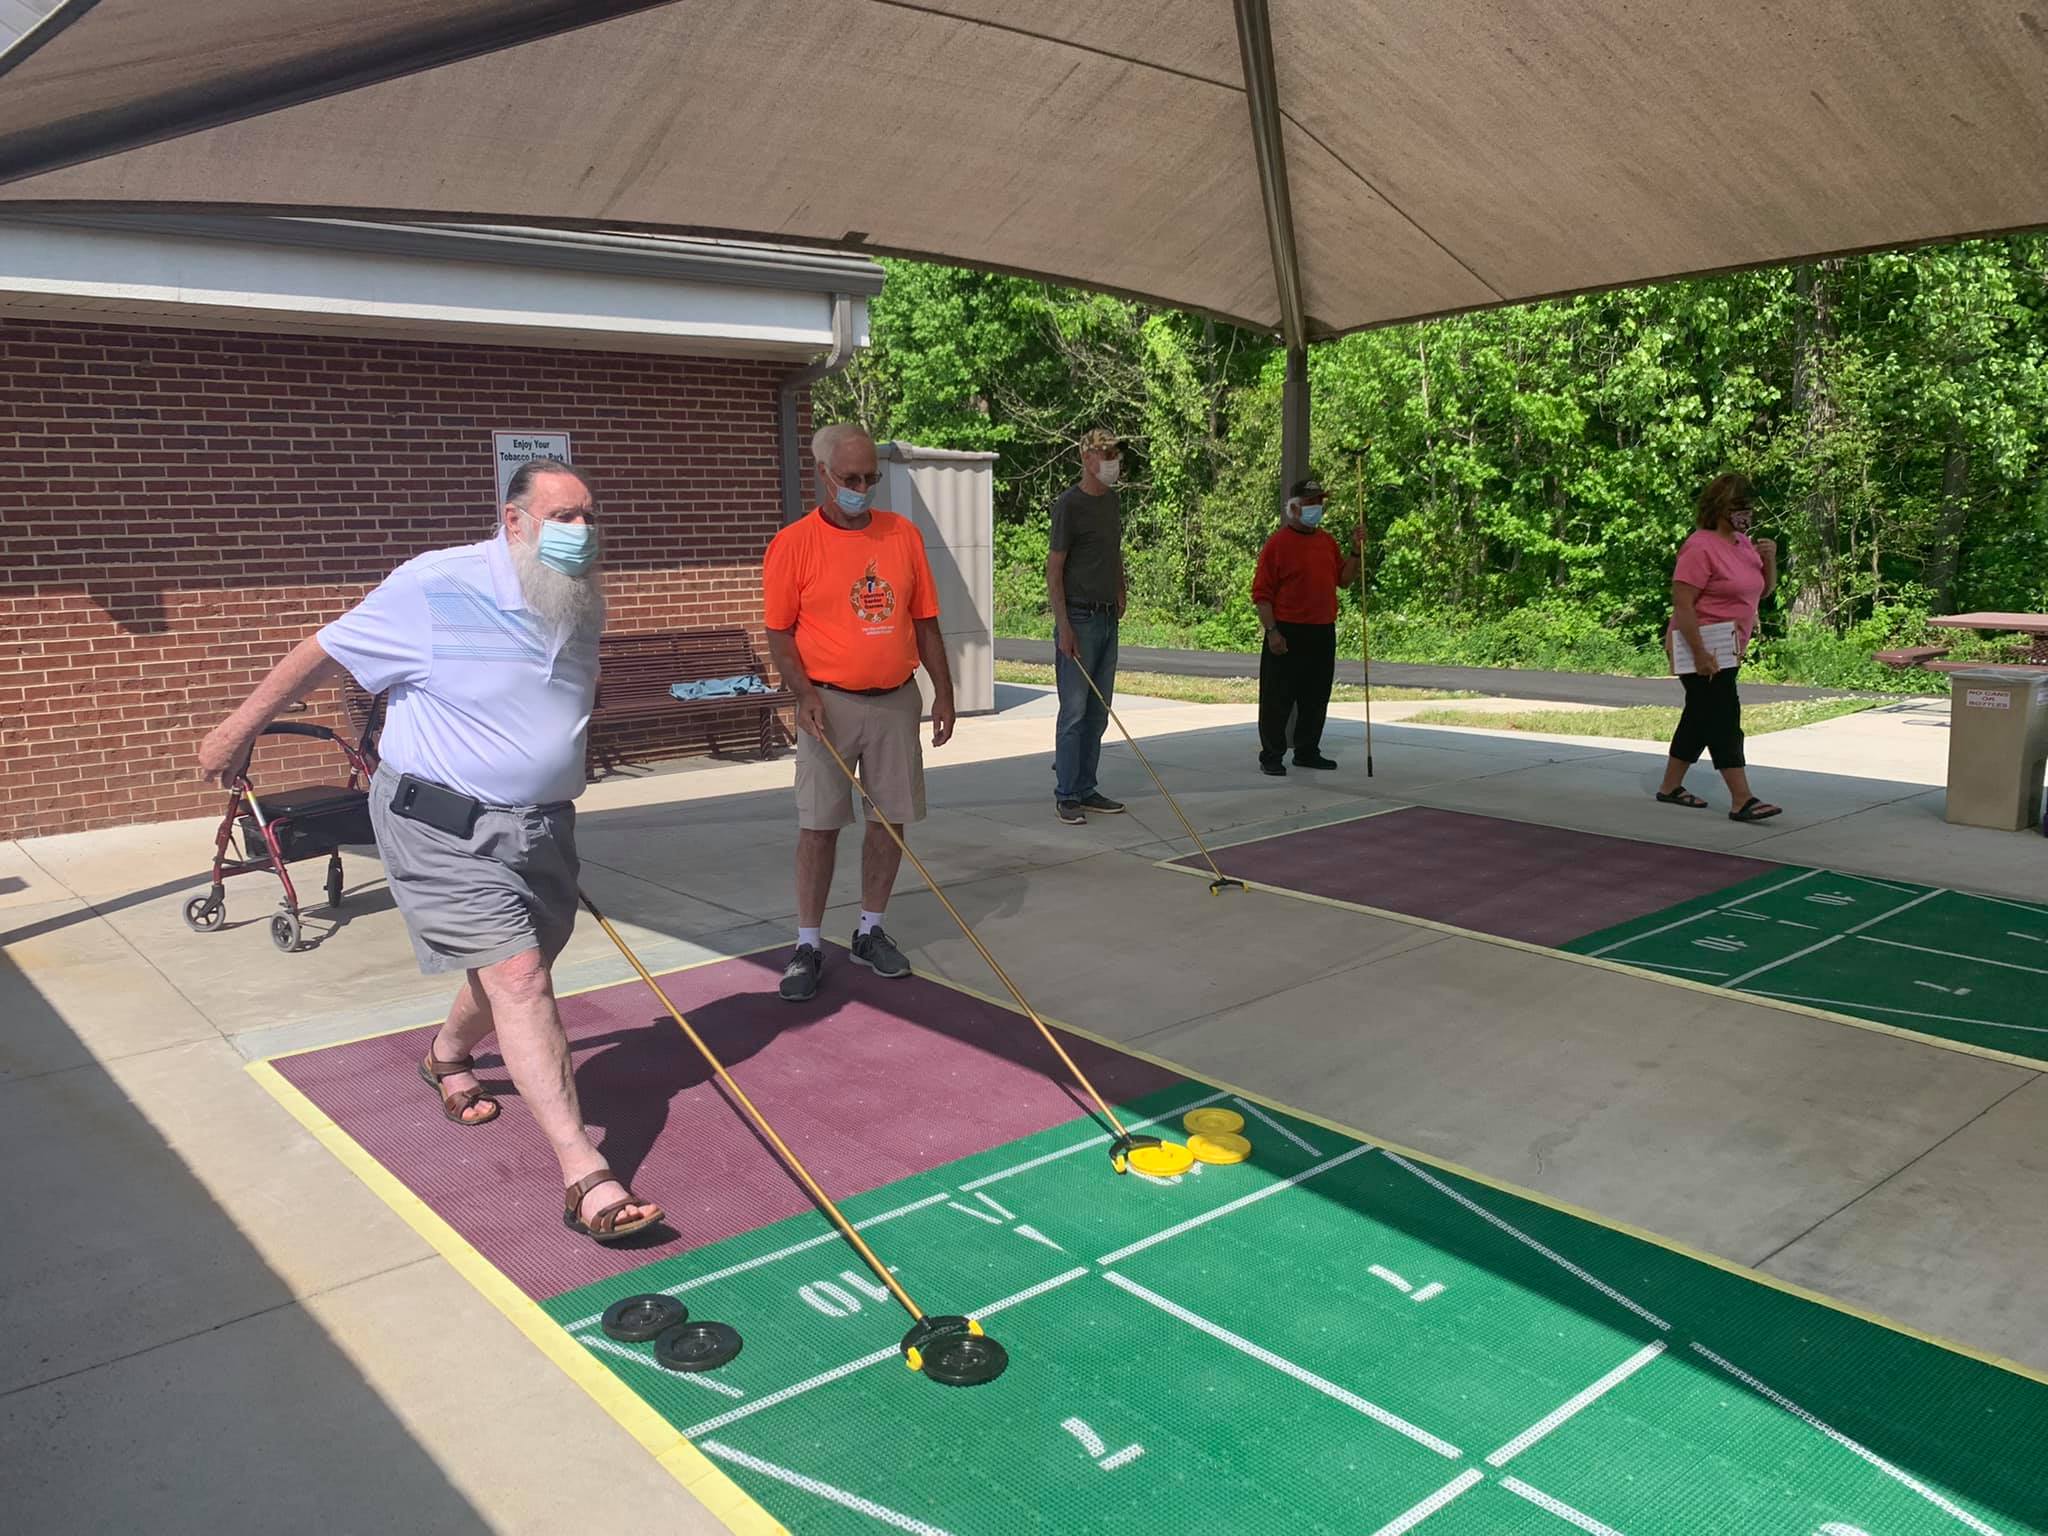 Registration Open For 2022 Cabarrus County Senior Games - WCCB